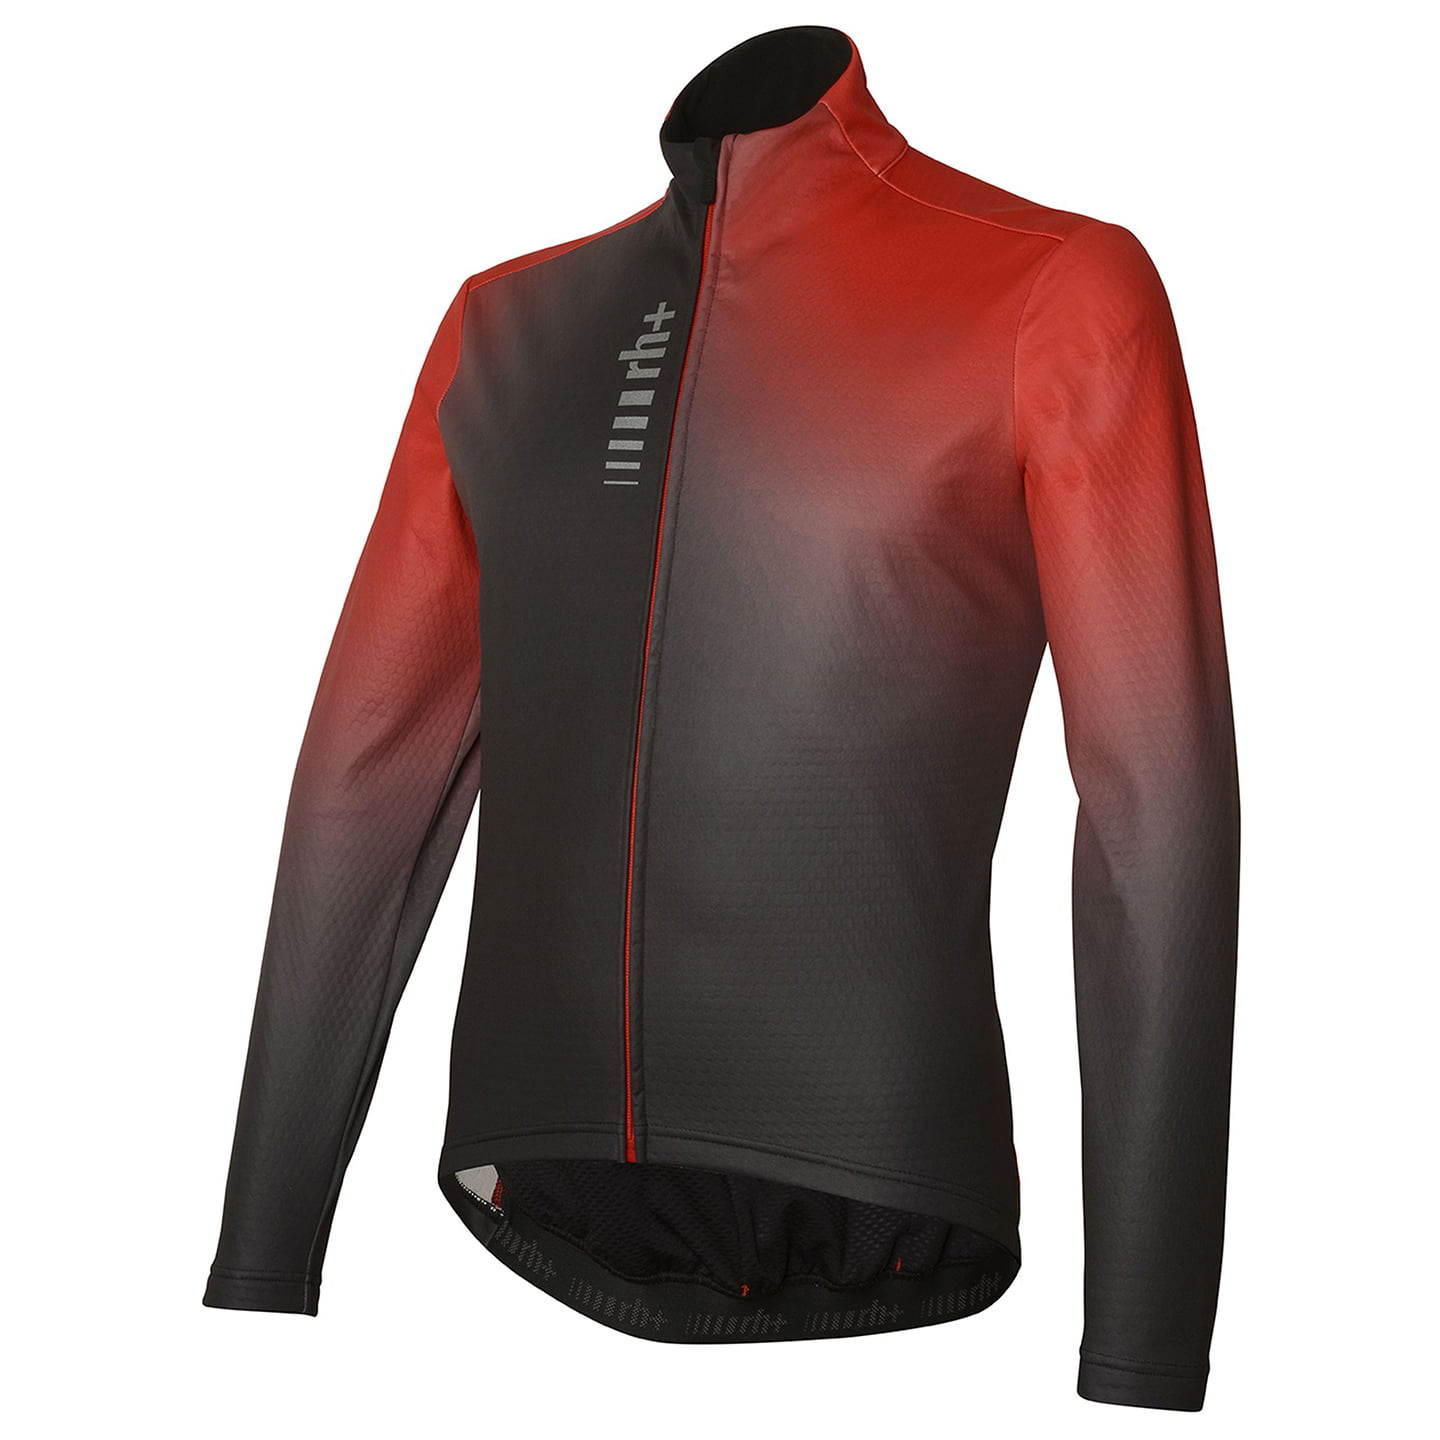 RH+ Stylus Printed Winter Jacket Thermal Jacket, for men, size XL, Cycle jacket, Cycle gear